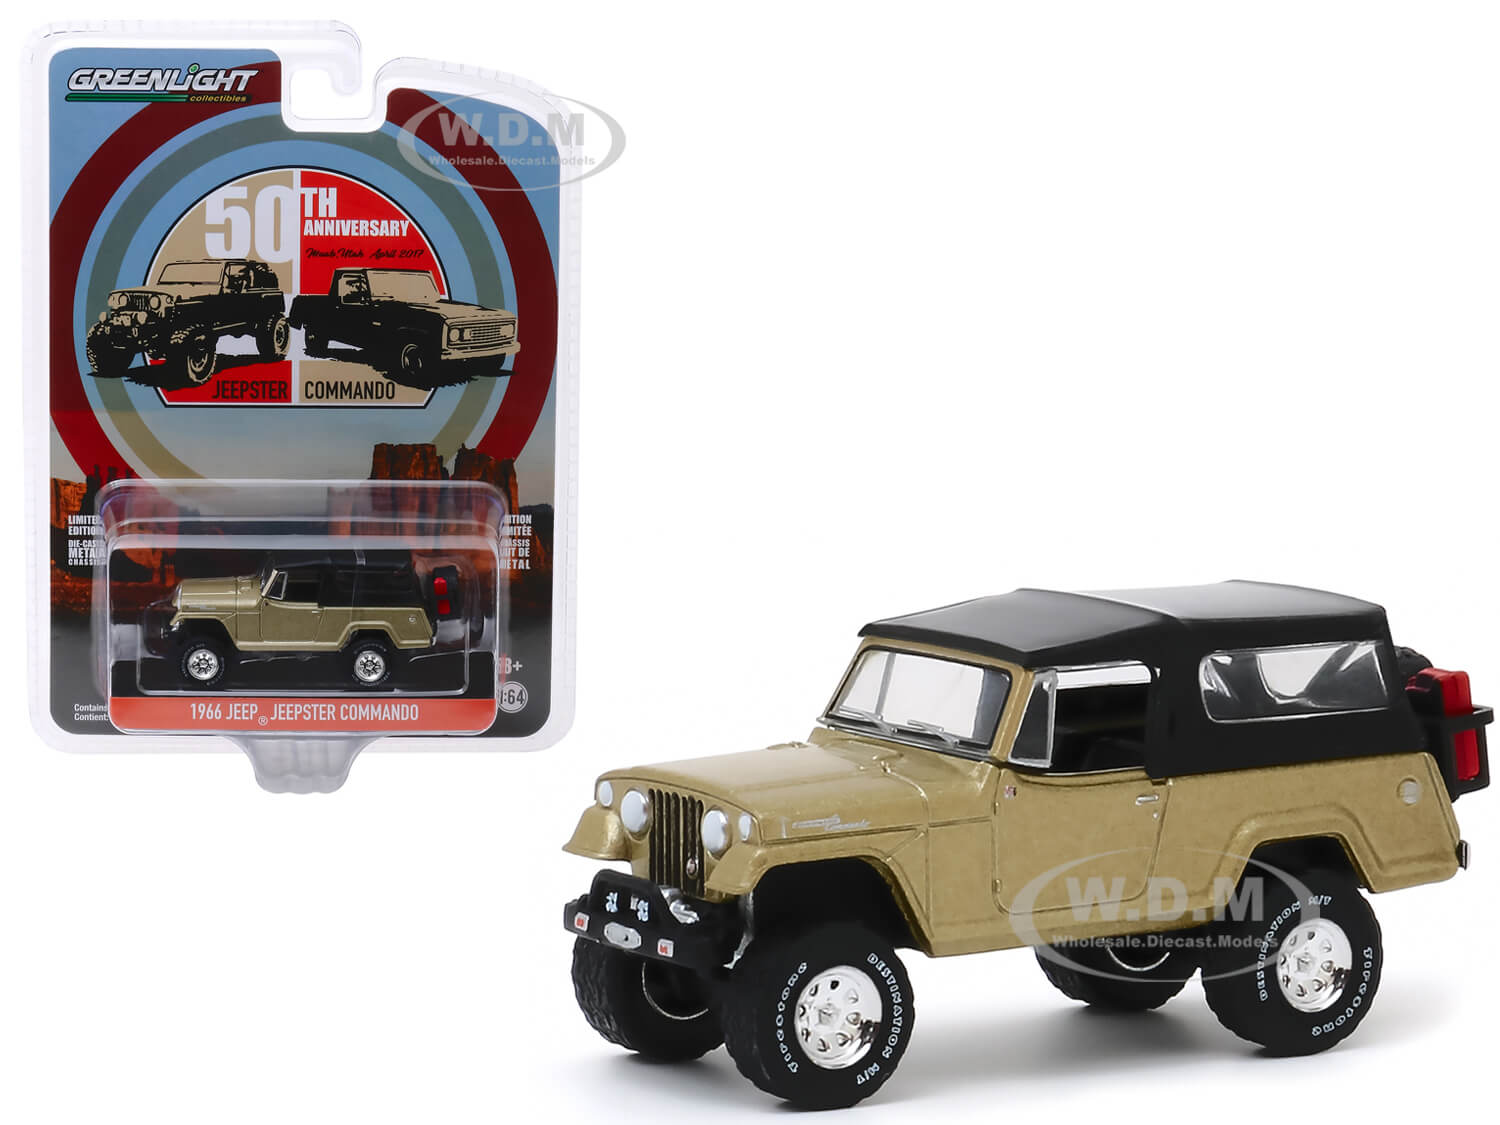 1966 Jeep Jeepster Commando Gold Metallic With Black Top Moab Utah (april 2017) "50th Anniversary" "anniversary Collection" Series 10 1/64 Diecast Mo